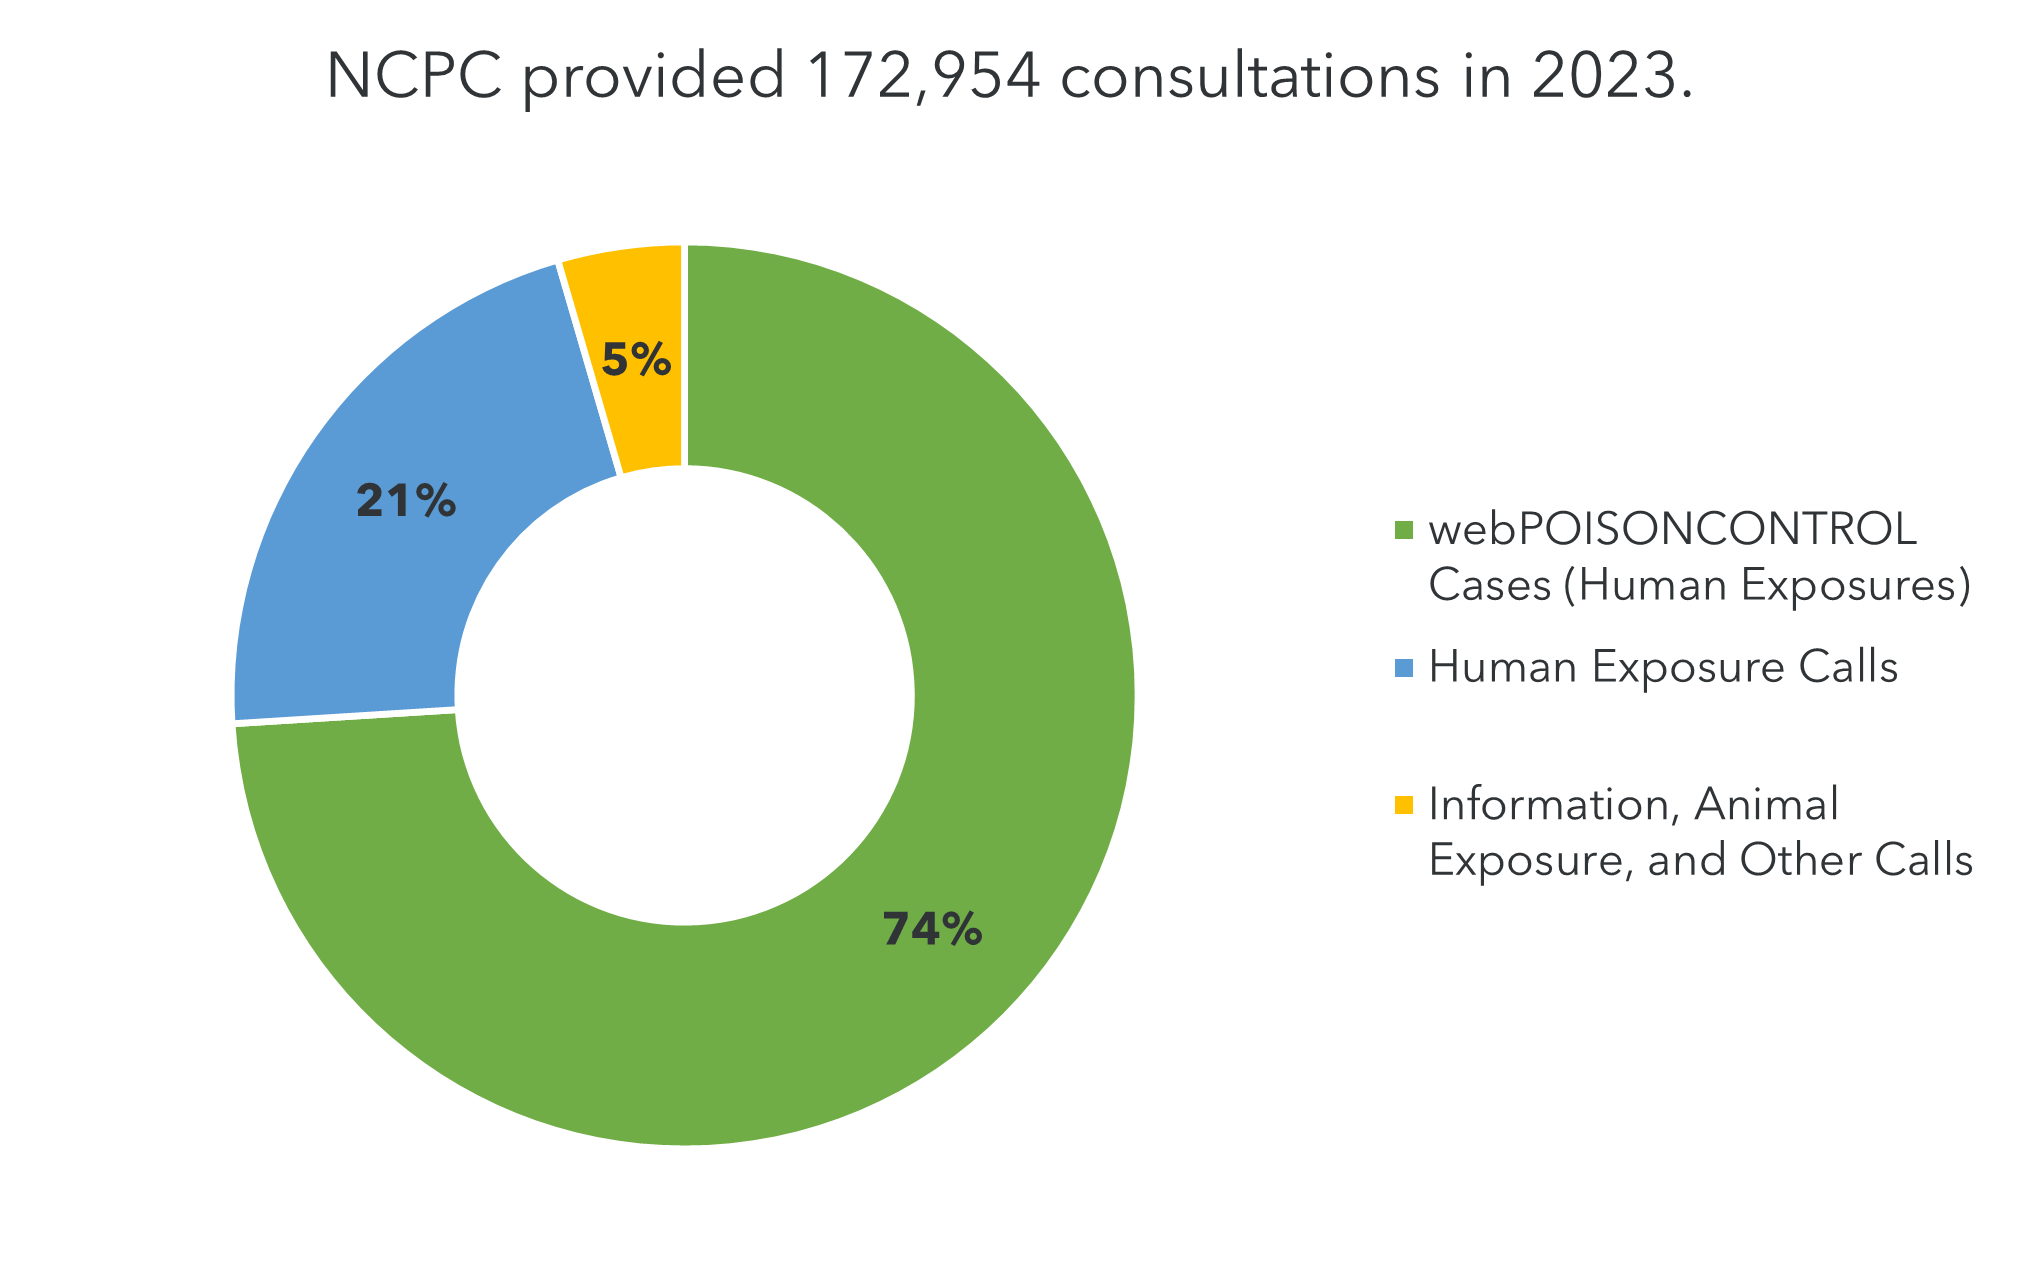 /sitecore/media library/Images/2023 NCPC Consultations Pie Graph